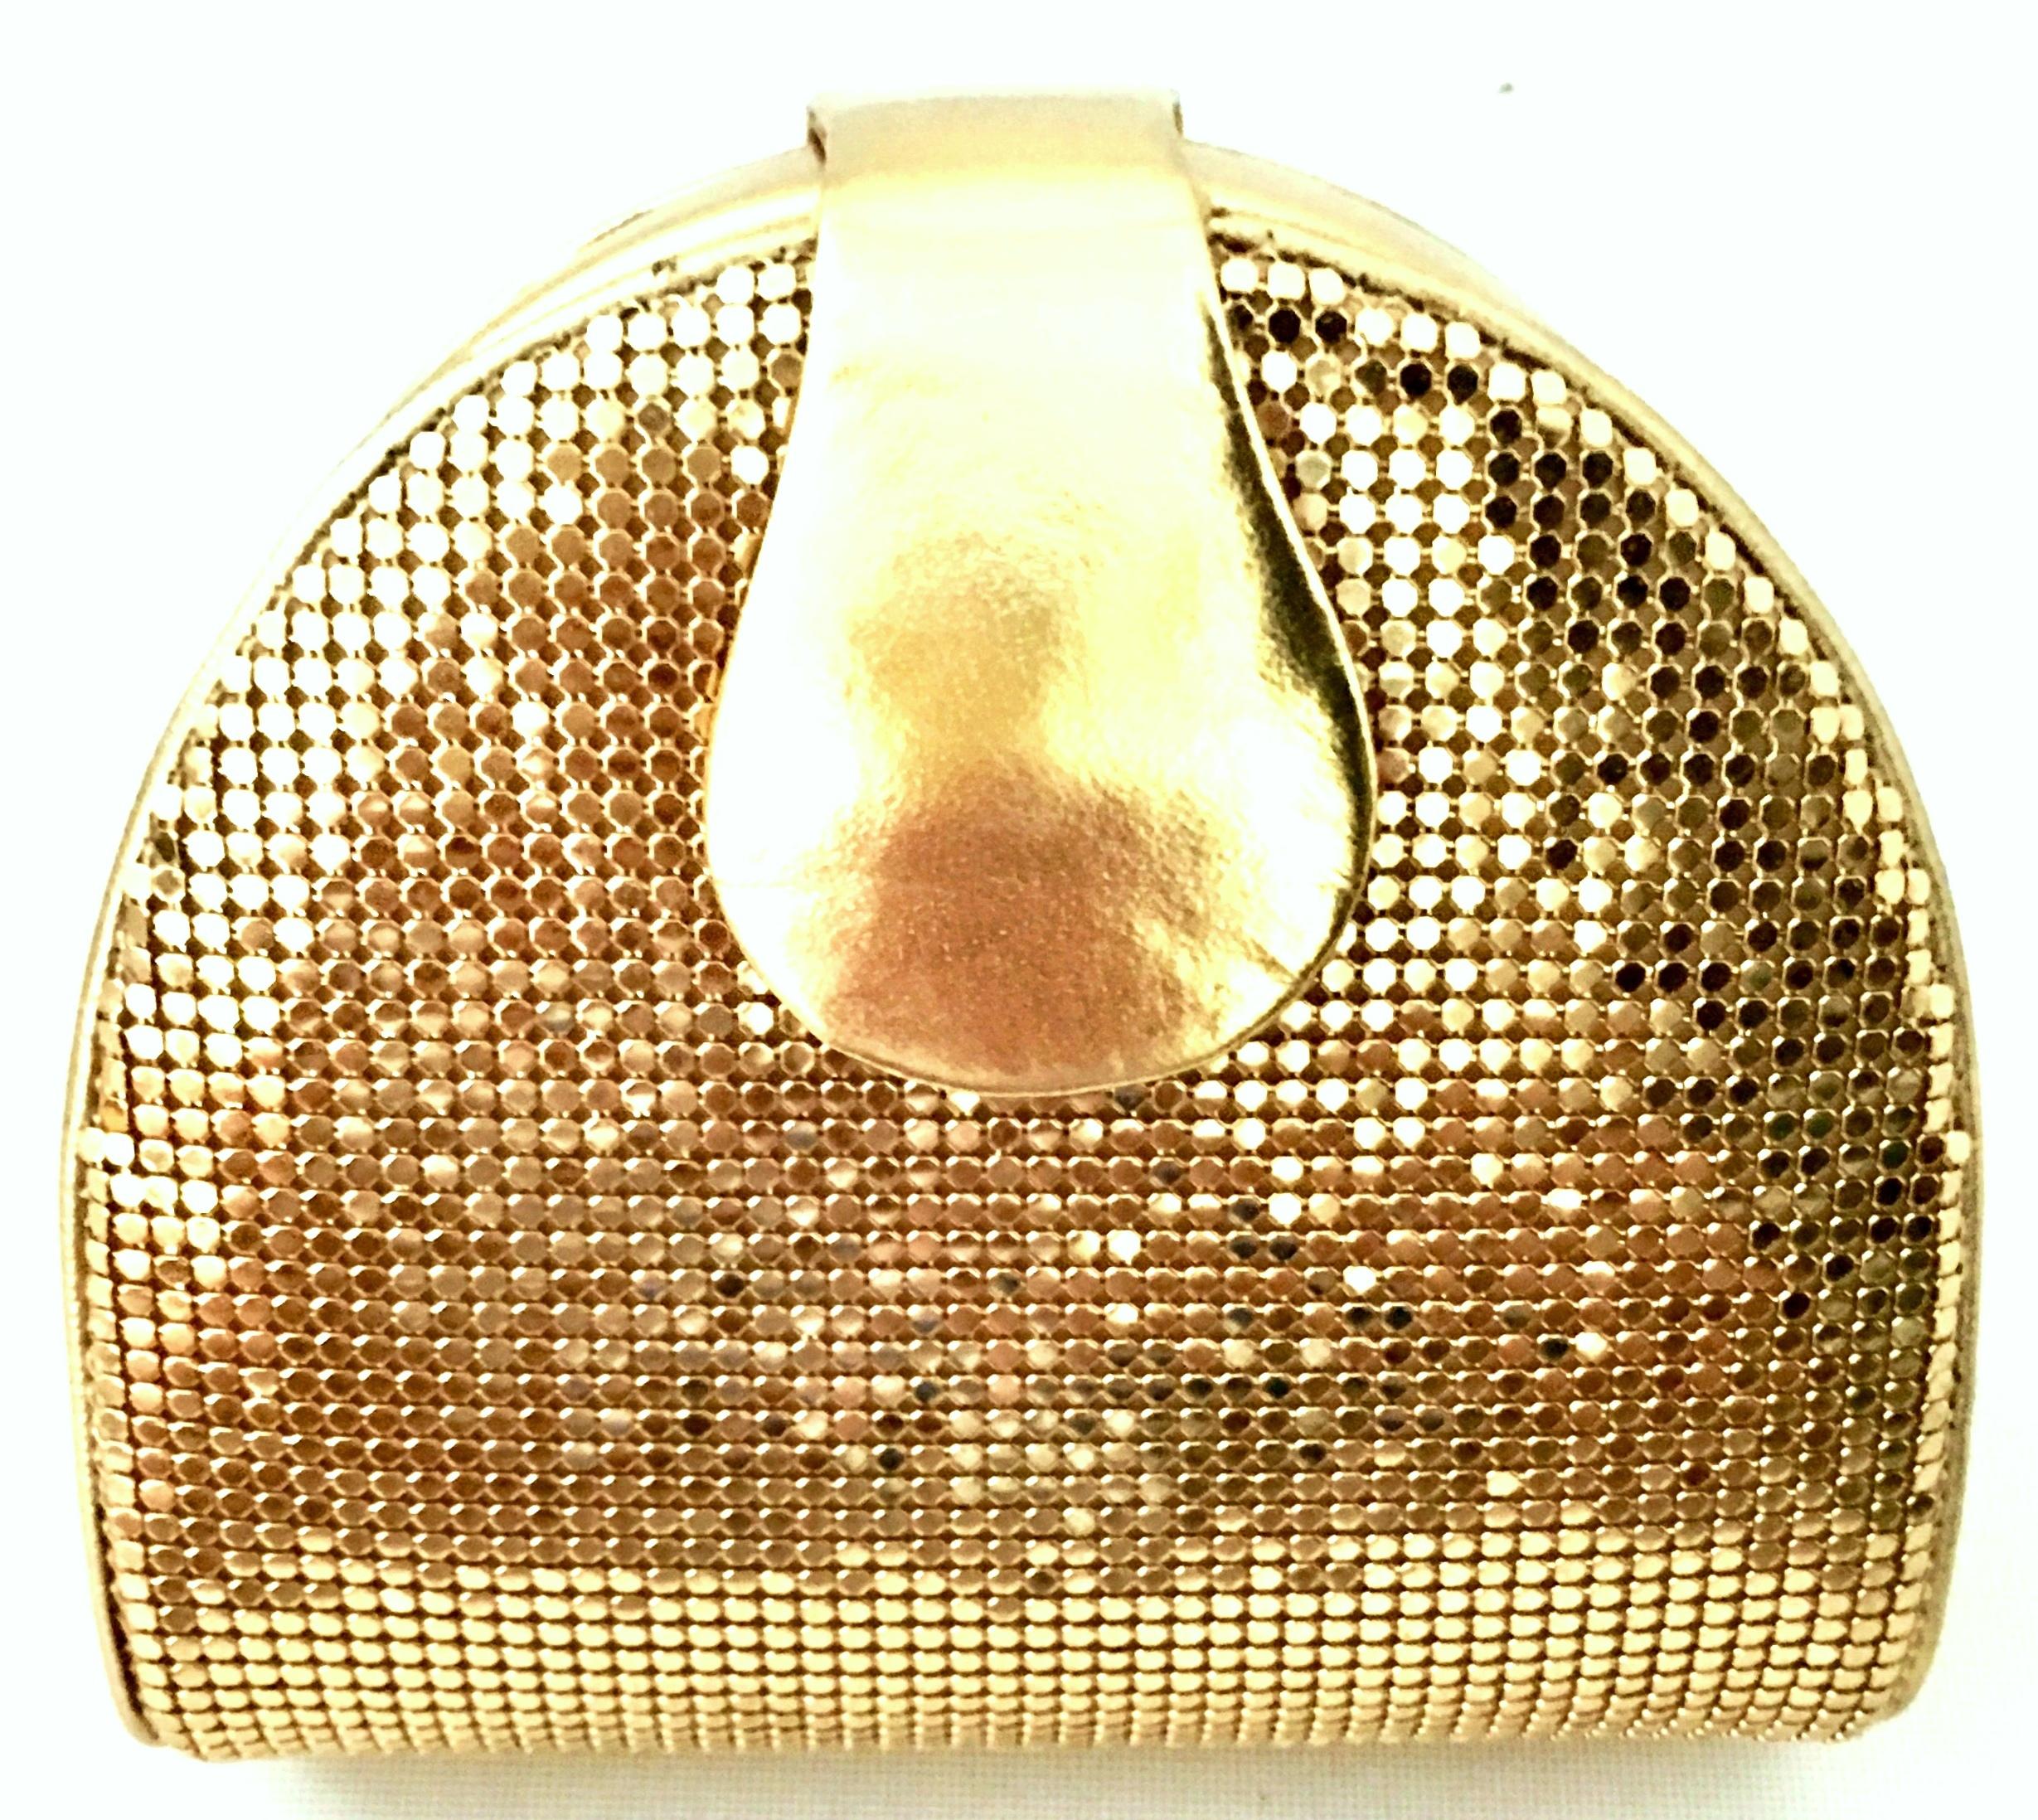 Vintage Whiting & Davis Gold Metal Mesh & Gold Metallic Leather Hand Bag. This unique hard sided clutch, cross boy or shoulder hand bag features a gold plate chain link shoulder strap that can be tucked in when not in use. The gold chain link